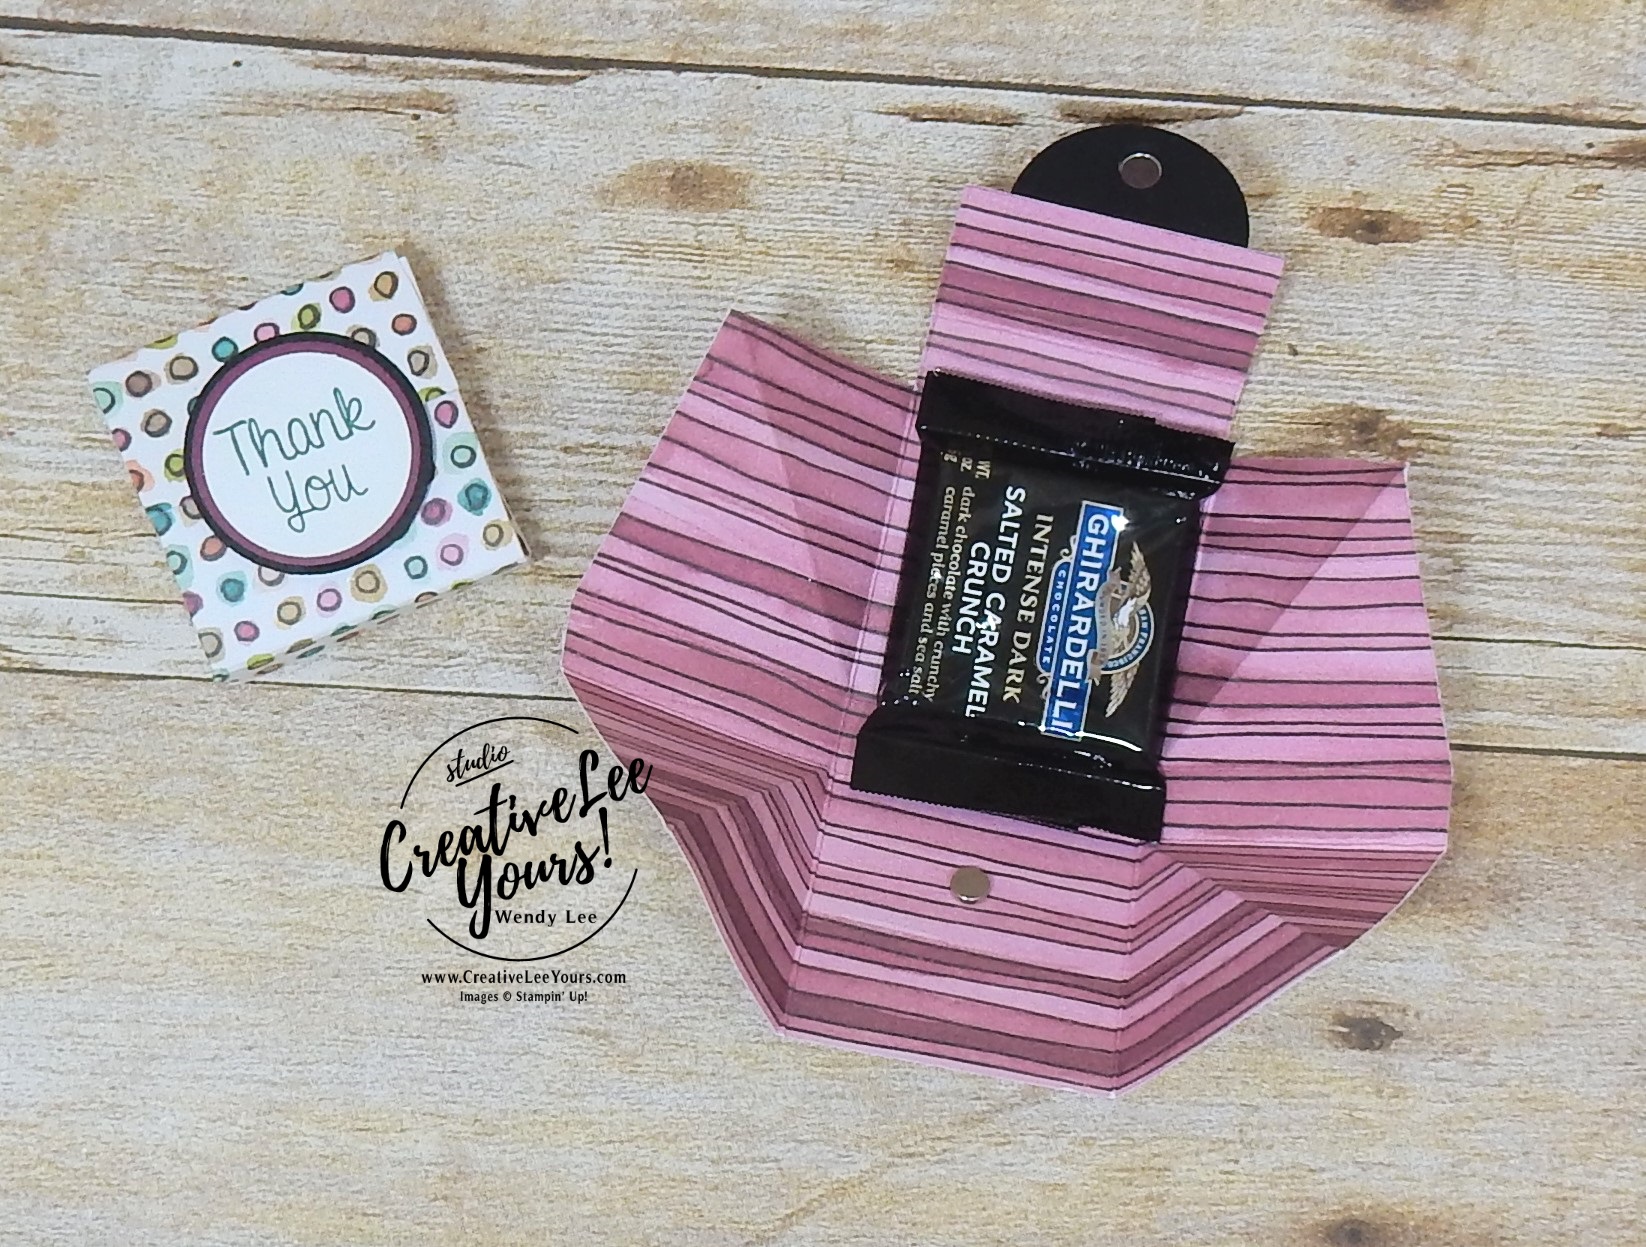 Stampin up 2018 2019 new catalog party with Wendy Lee, #creativeleeyours, creatively yours, creative-lee yours, open house, handmade, stamping, SU, Hand Delivered stamp set ,rubber stamps, stamping,  birthday, thank you, congrats, friend,  SU cards, candy treat, magnetic closure